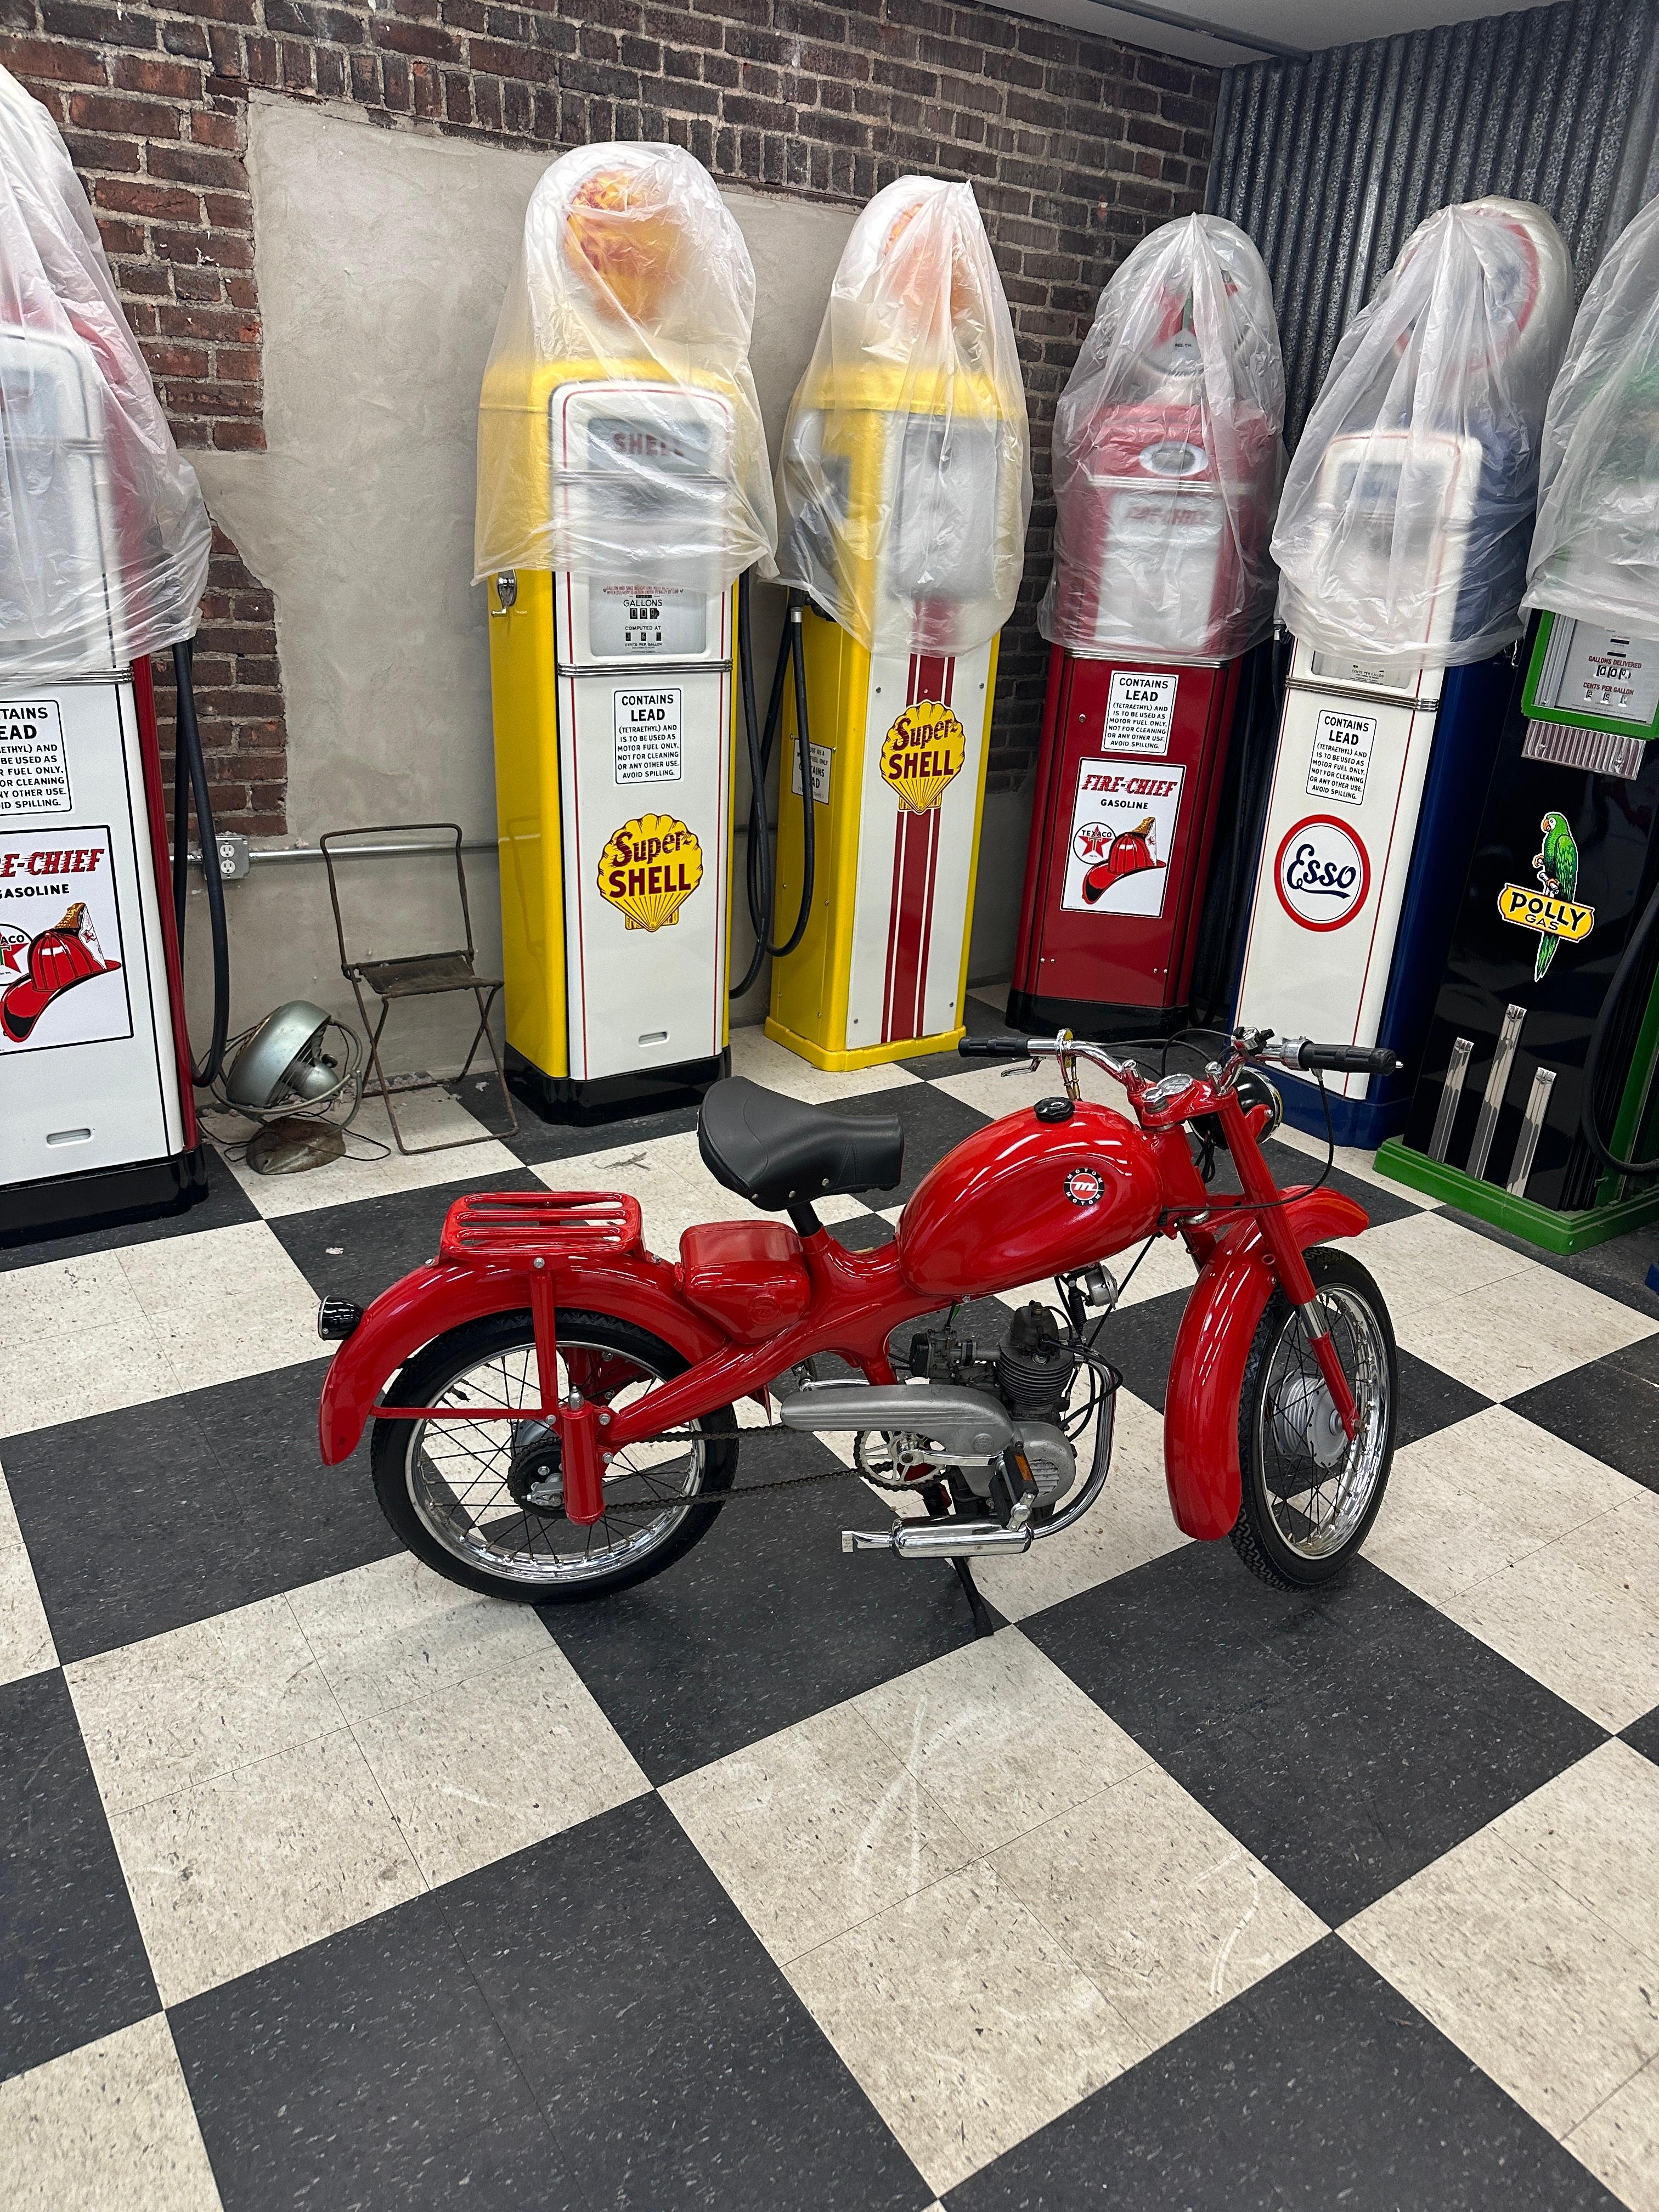 This is a beautifully restored 1961 Moto Morini 